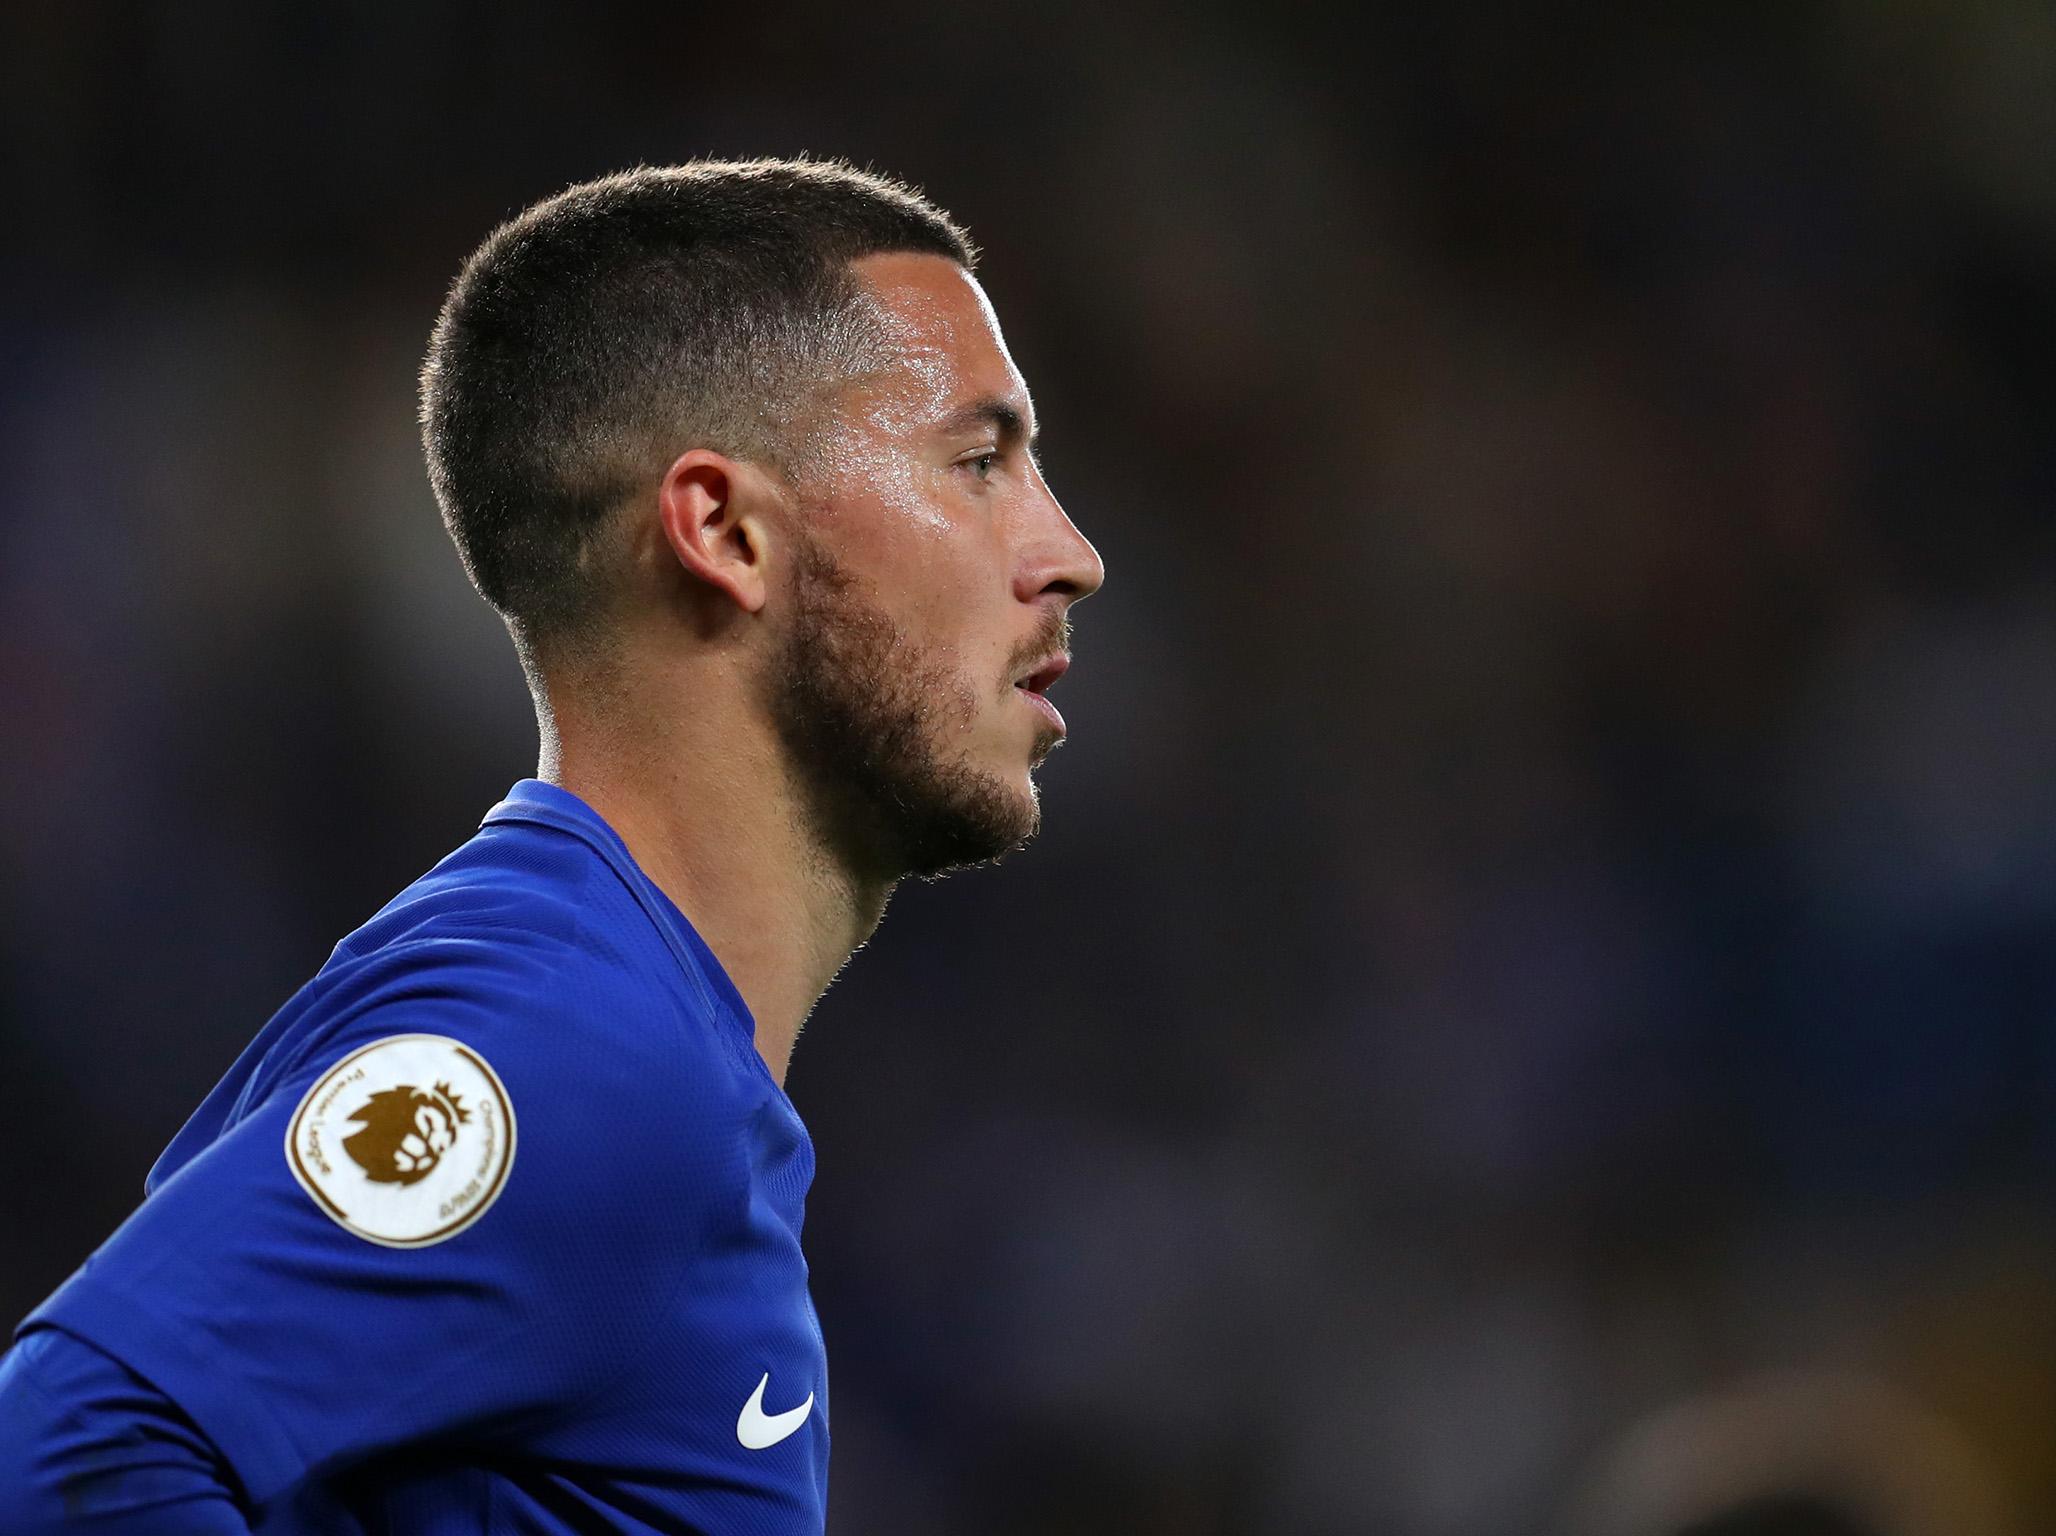 Eden Hazard has previously said he wants Chelsea to sign ‘good players’ this summer